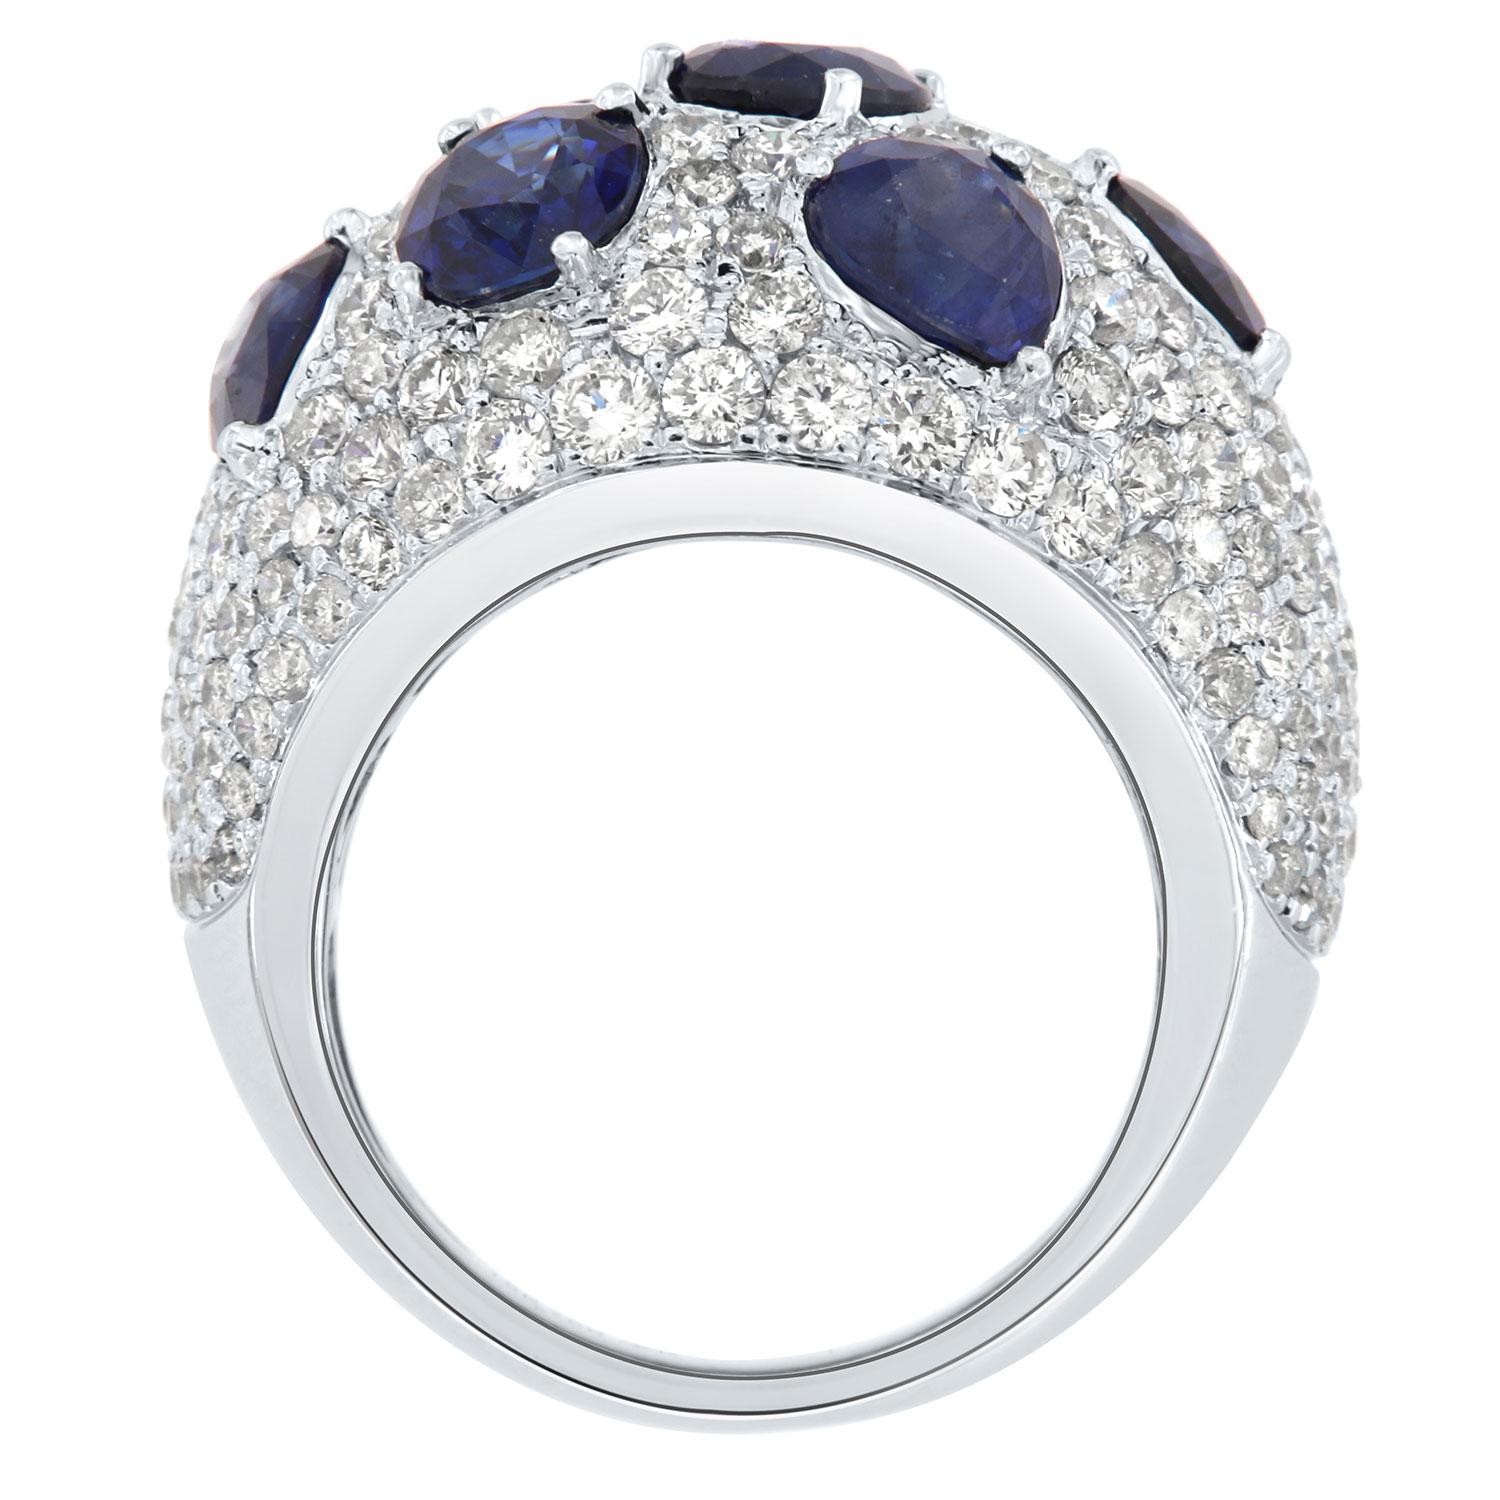 18K White Gold Sapphire & Diamonds Ring '11.42 Carat Total Weight' In New Condition For Sale In San Francisco, CA